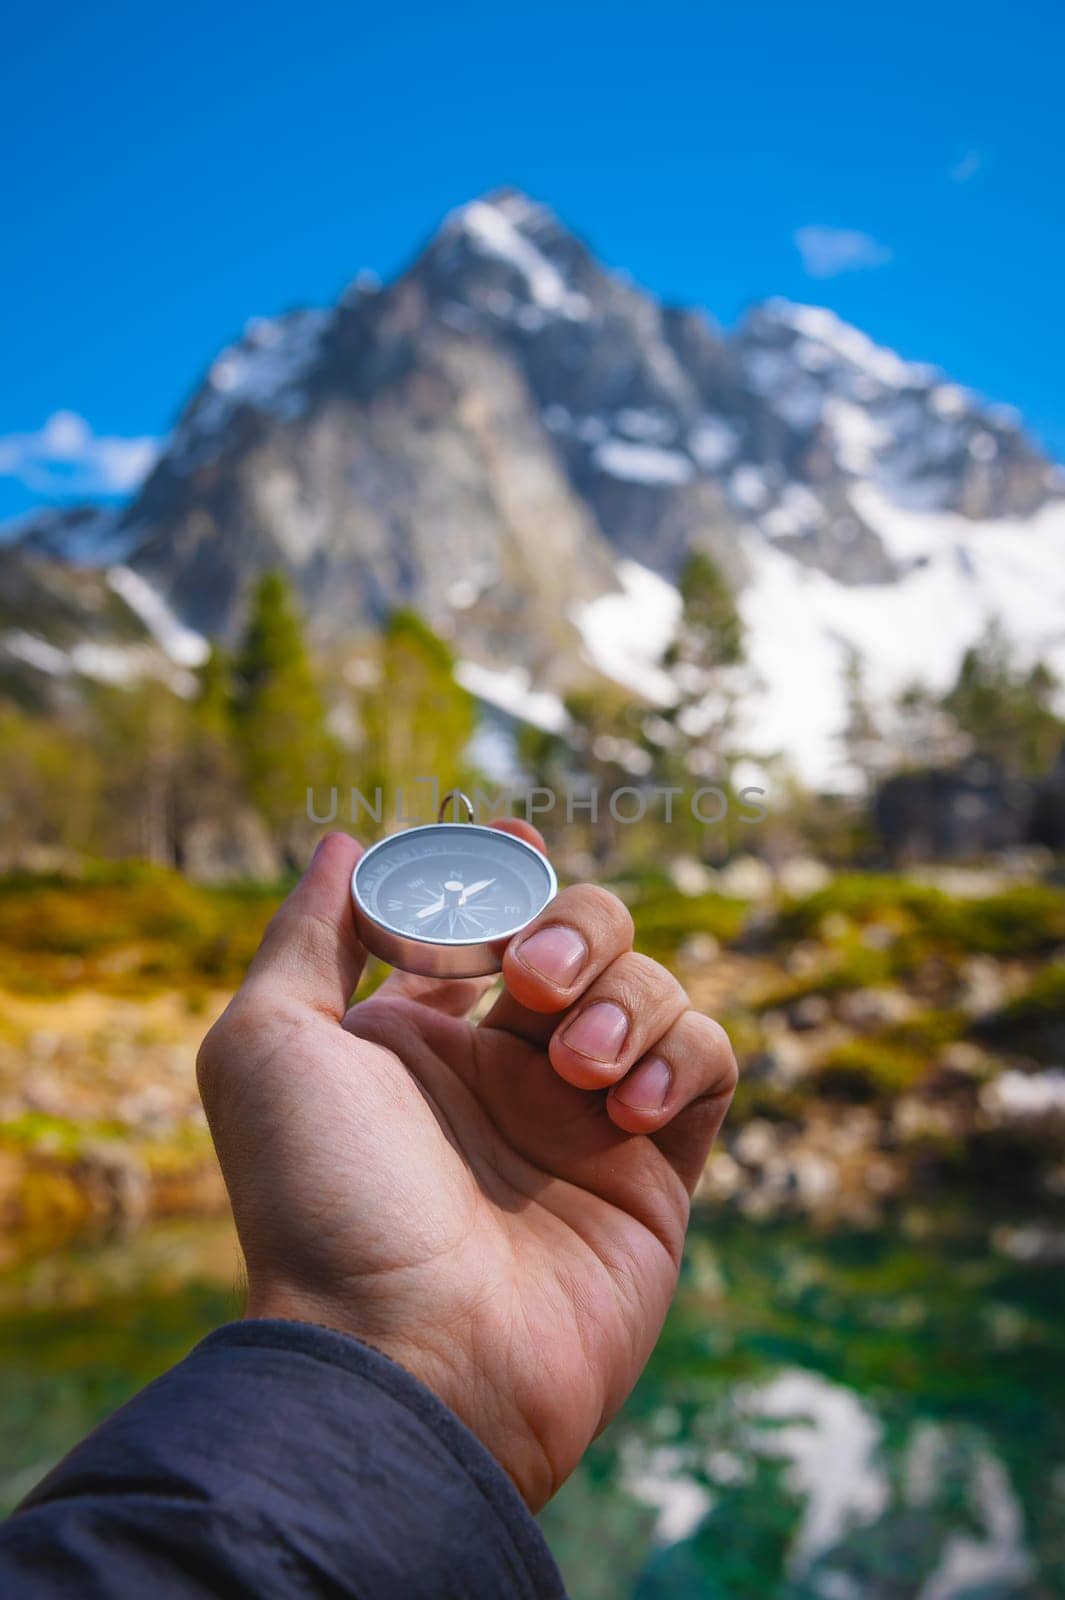 A man with a compass in his hand in the high mountains near a clear lake. Travel concept. Landscape photography. A man traveler is looking for direction with a compass on the coast near a lake in the mountains, first person view.